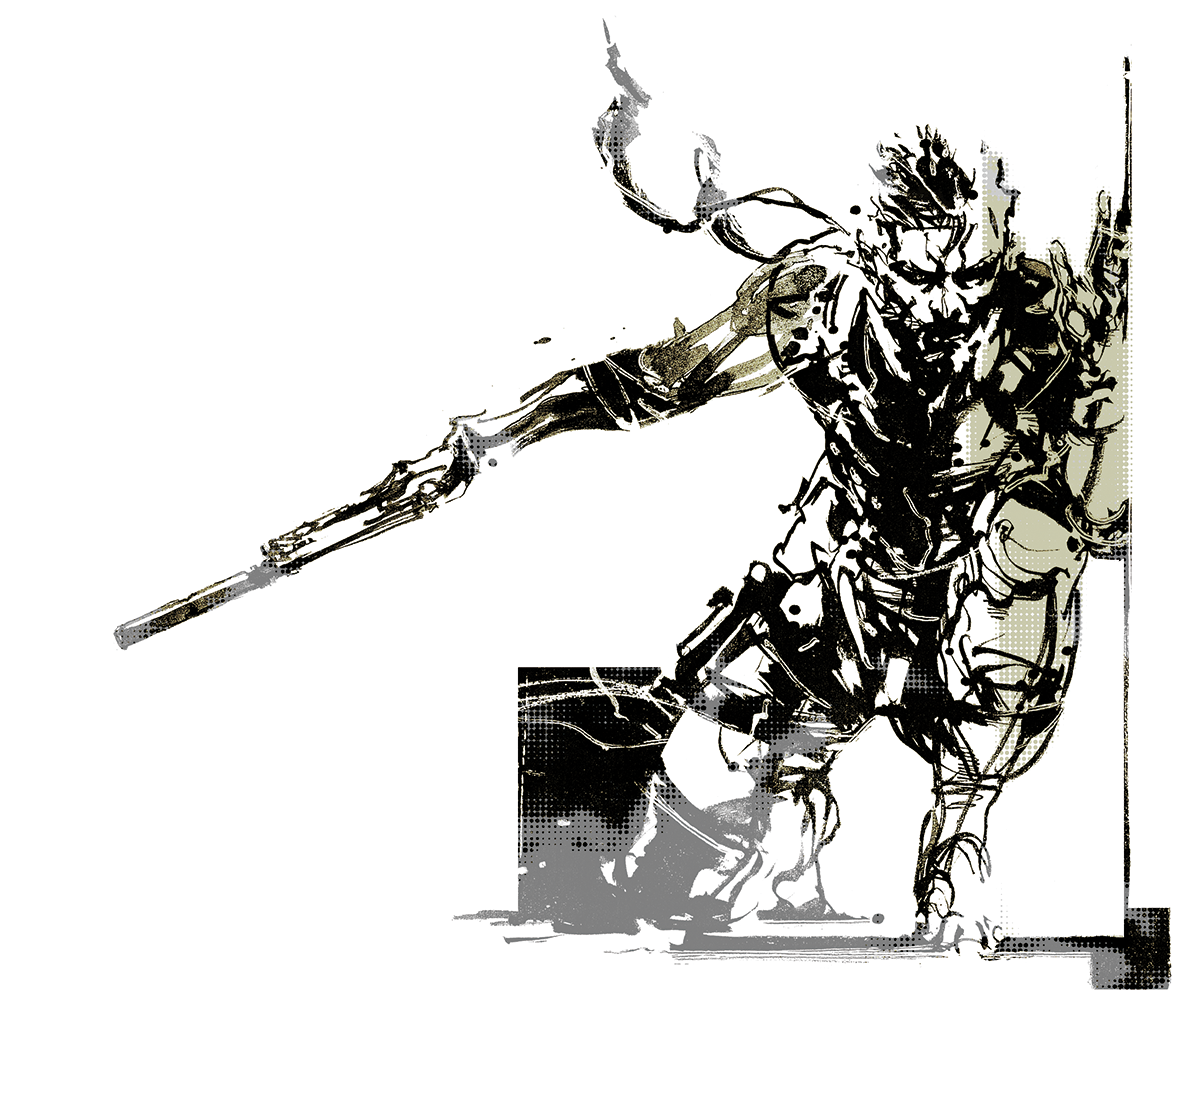 High quality versions of Metal Gear art being made available